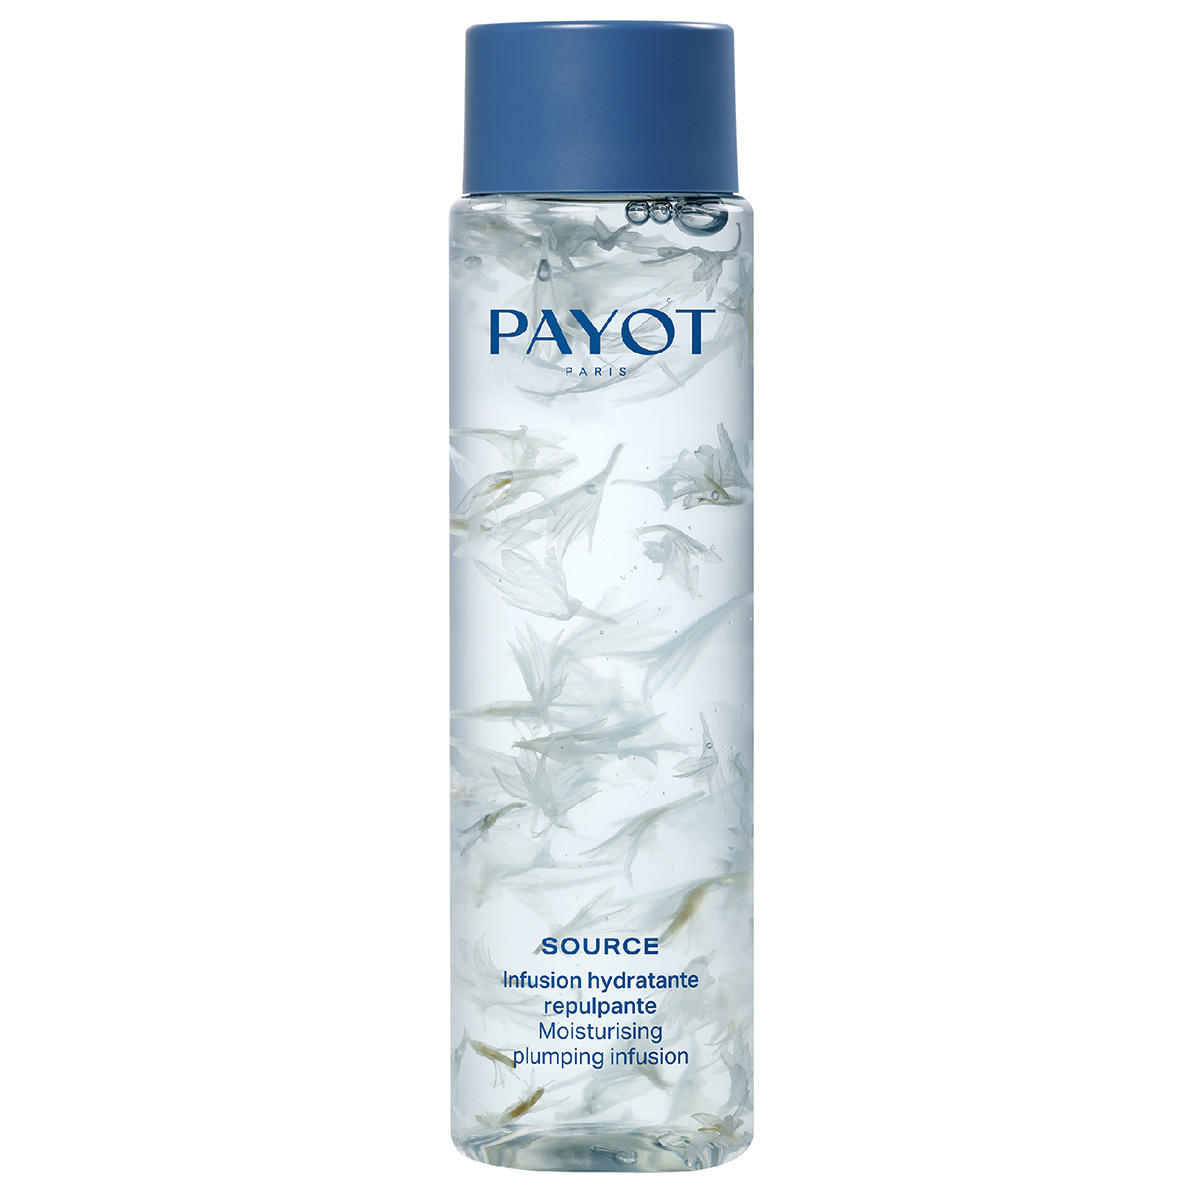 Payot Source Infusion Hydratante Repulpante 125 ml - 1